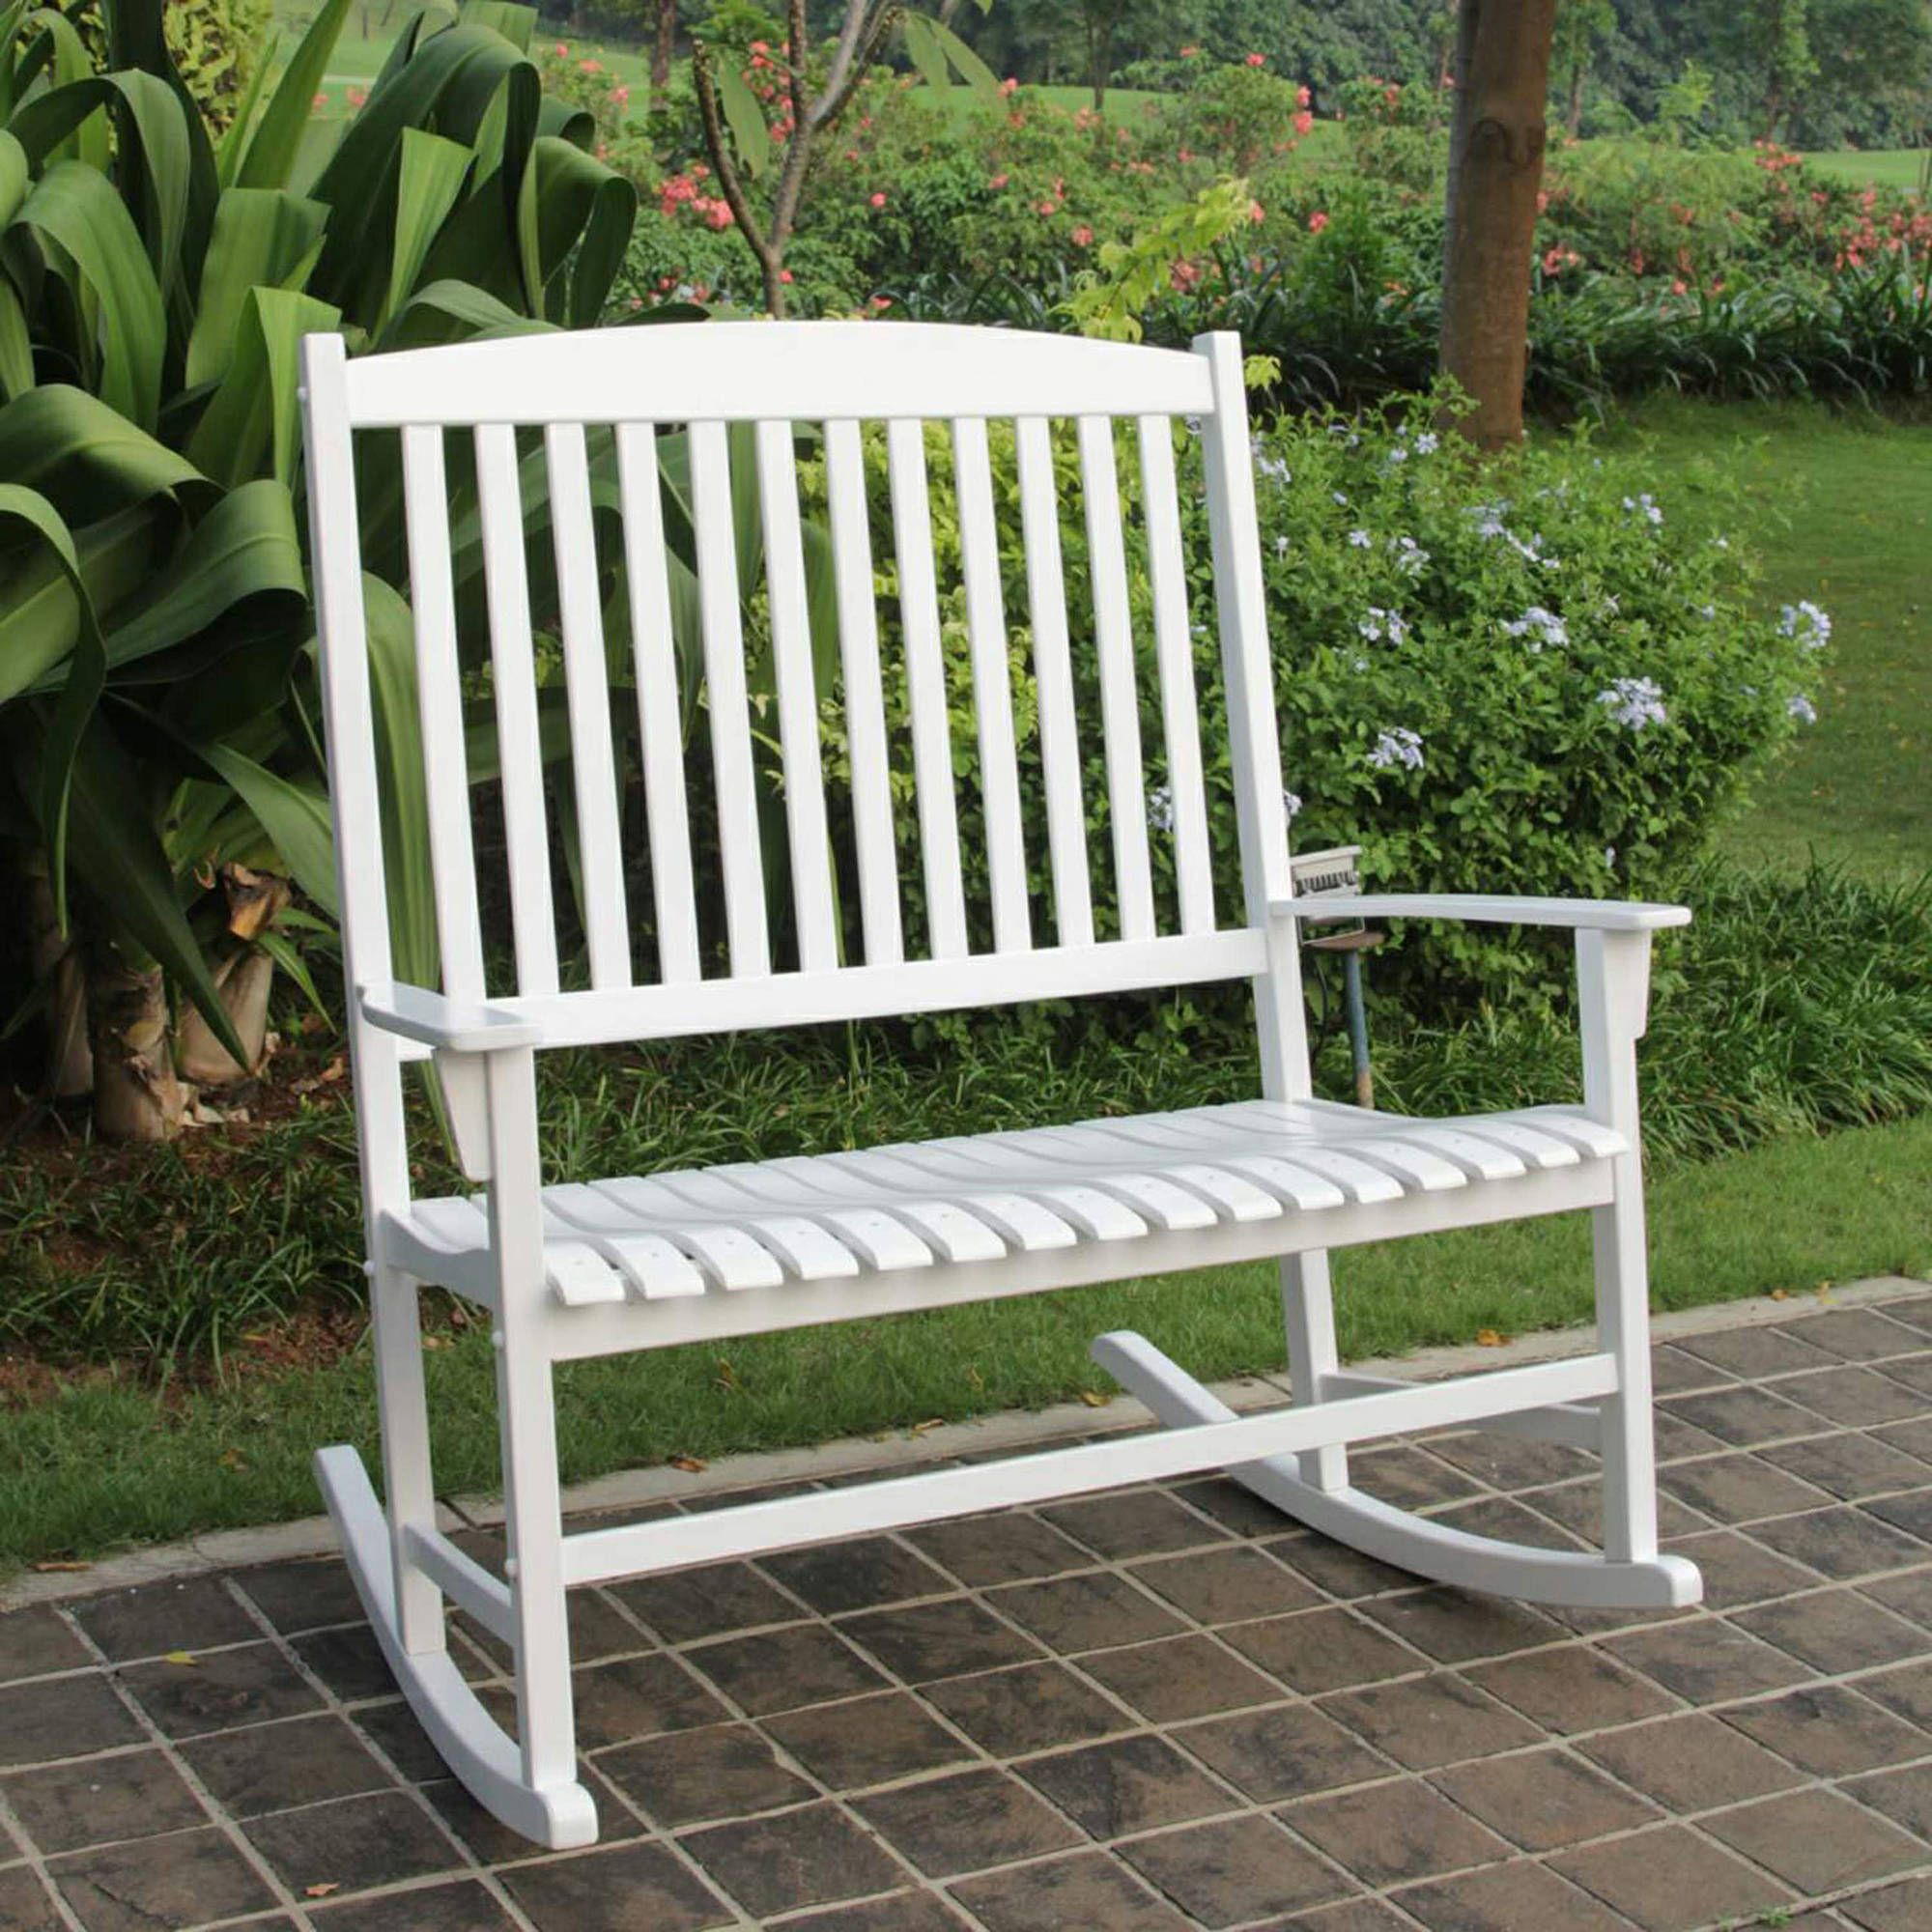 Mainstays Outdoor Double Rocking Chair White Solid Hardwood Wide Seat In 2019 White Wood Soutdoor Seating Sets (View 2 of 15)